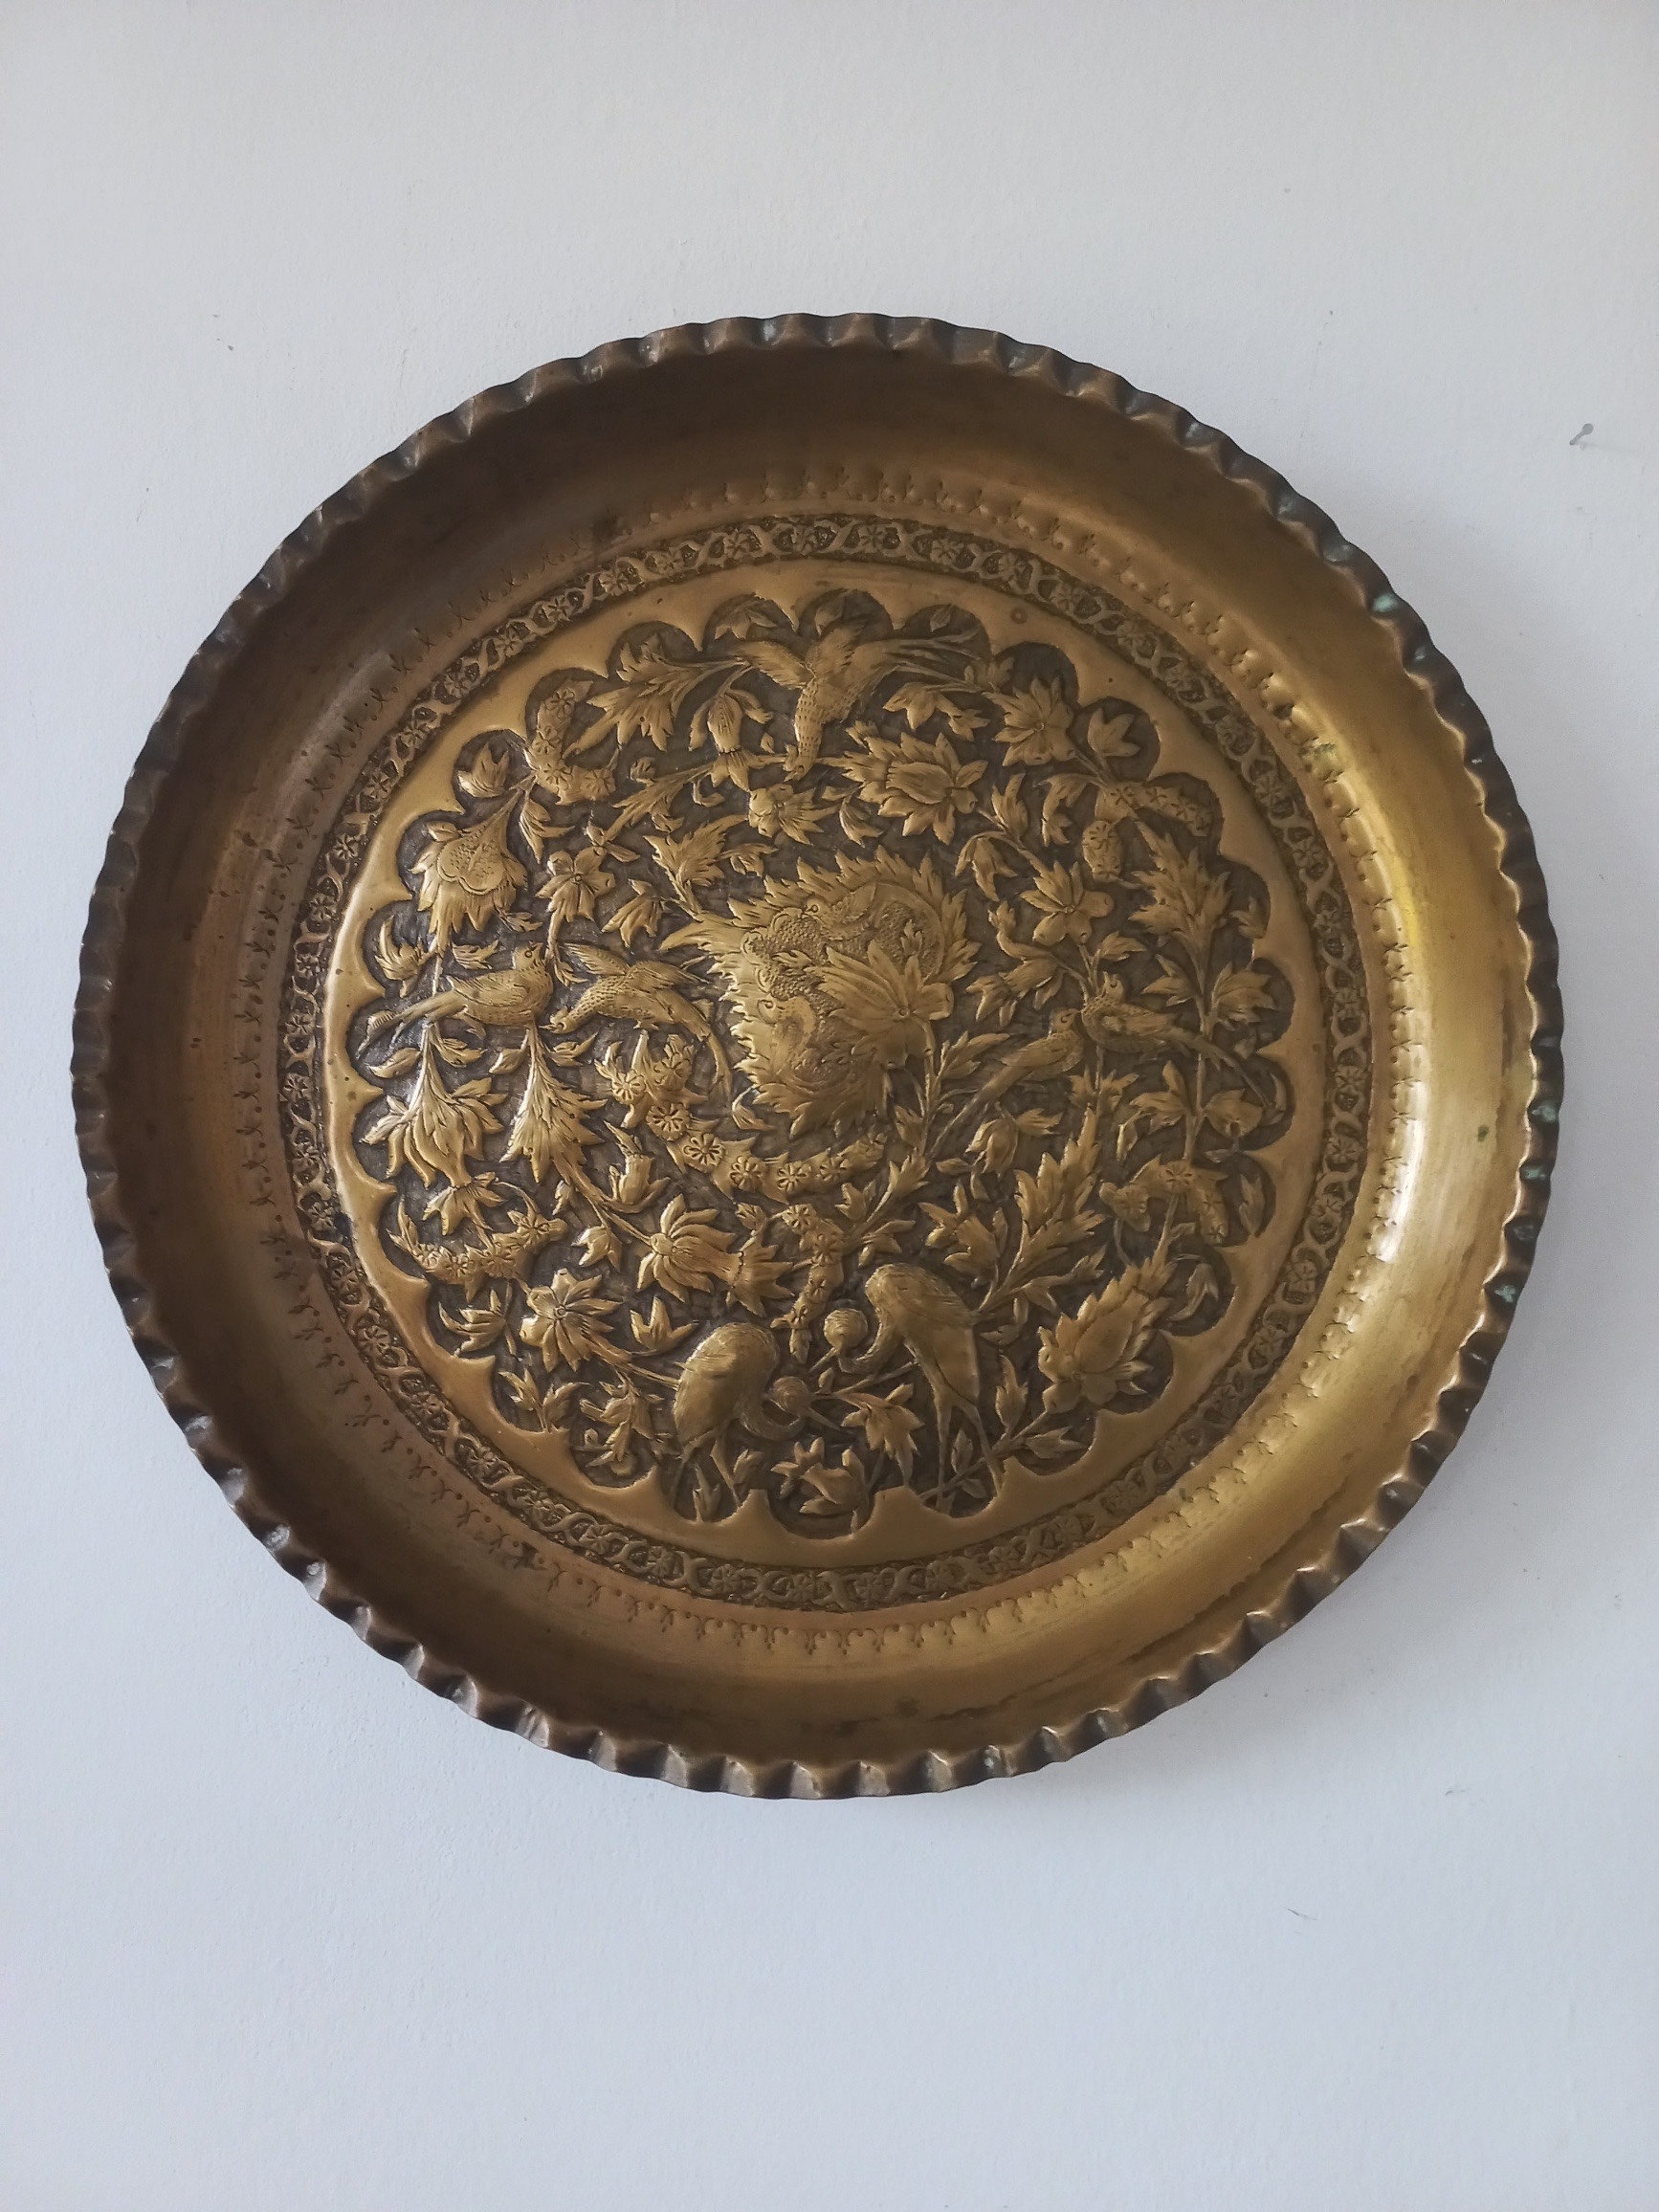 Rare Antique Persian Brass Tray Plate Decorative Wallhanging